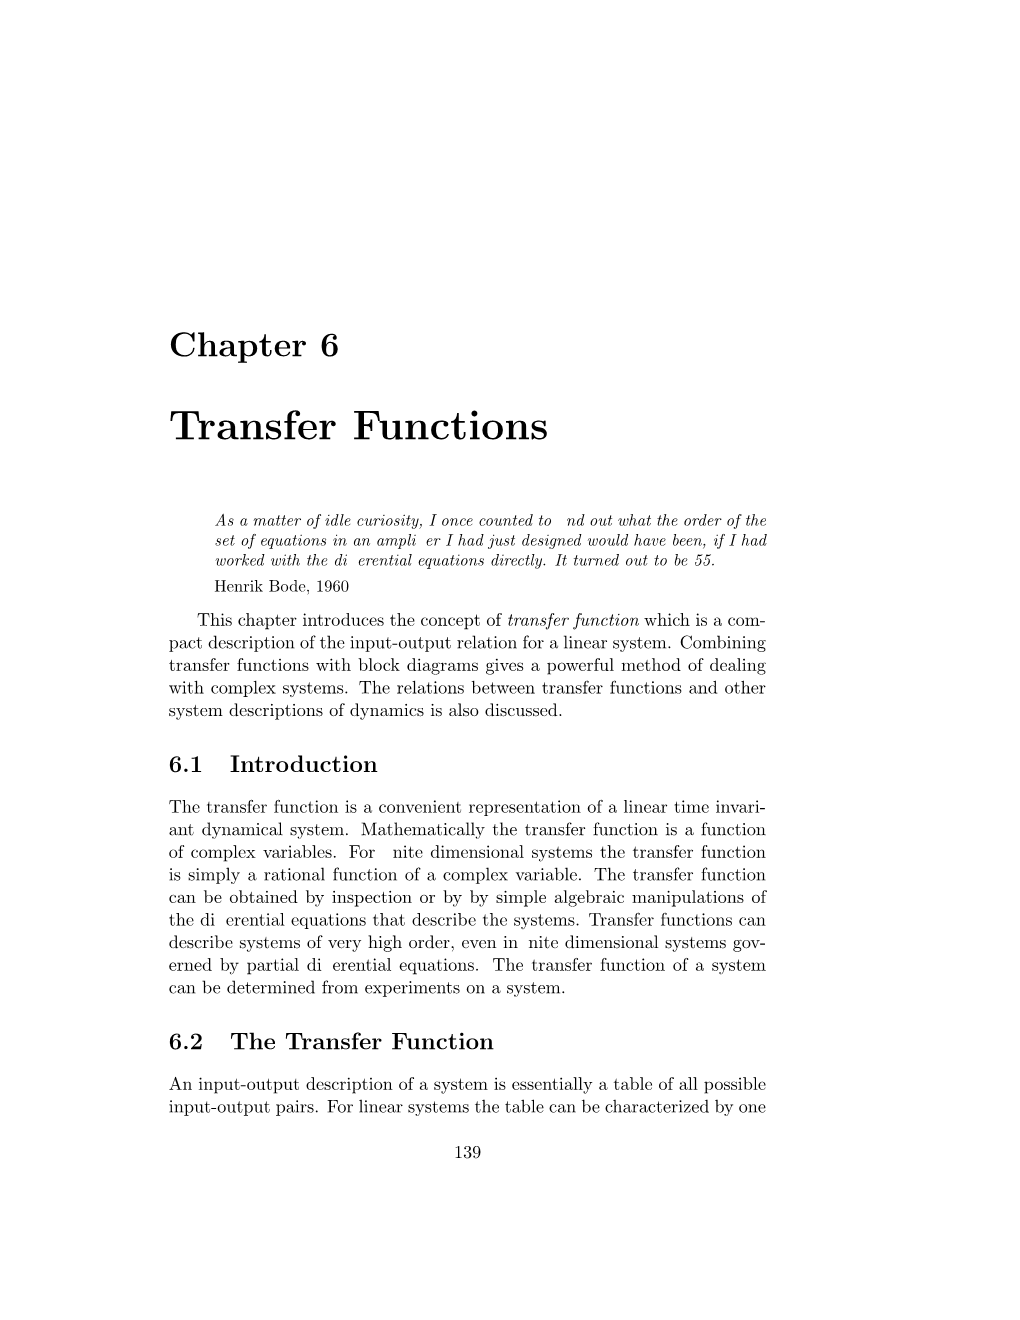 Chapter 6, Transfer Functions